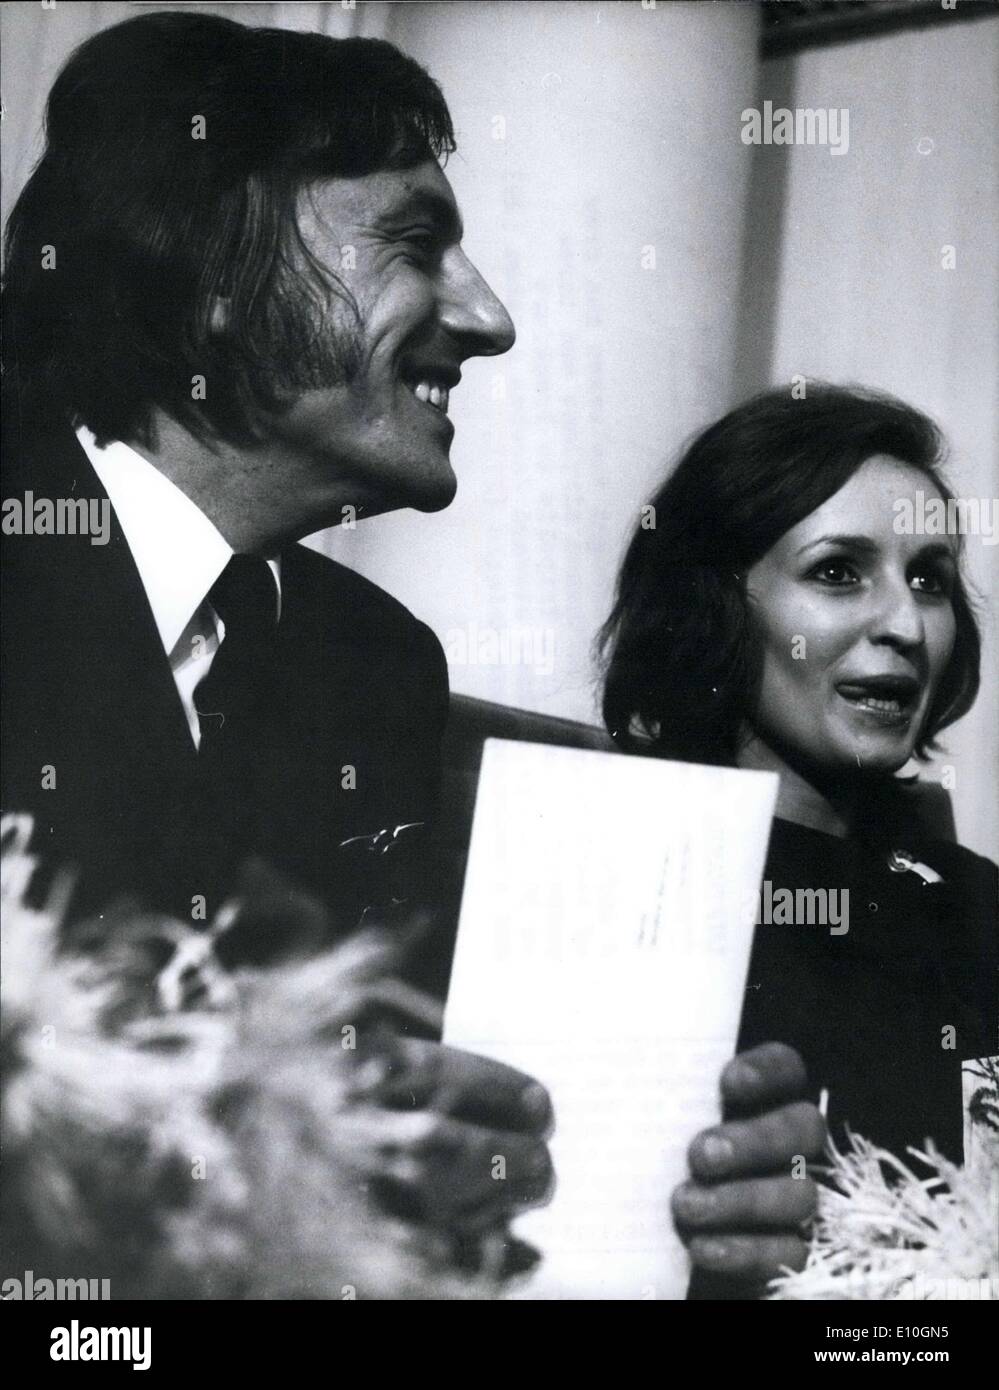 Oct. 31, 1972 - Lufthansa Crew Flown Back From Tripolis: A Lufthansa aircraft brought the seven men of the Kidnapped Lufthansa airplane and three passengers back from Tripolis to Frankfurt on 30.10.. Photo Shows Chief Steward Jacobs Abraham (29) and Stewardess Maya Meincke (27) Stock Photo